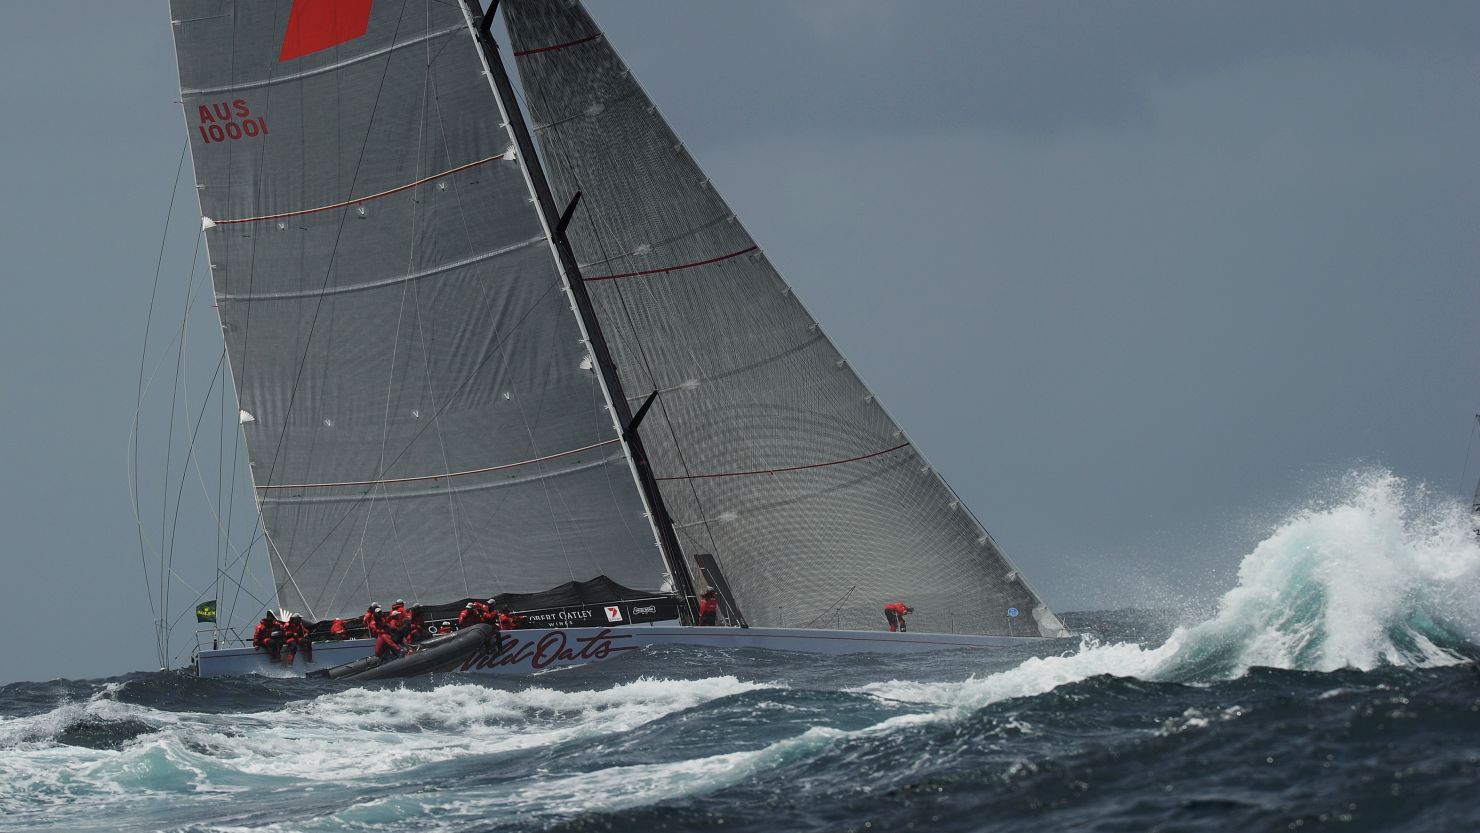 Supermaxi Wild Oats XI enters open water after sailing out of Sydney Harbor in rough conditions on December 26.